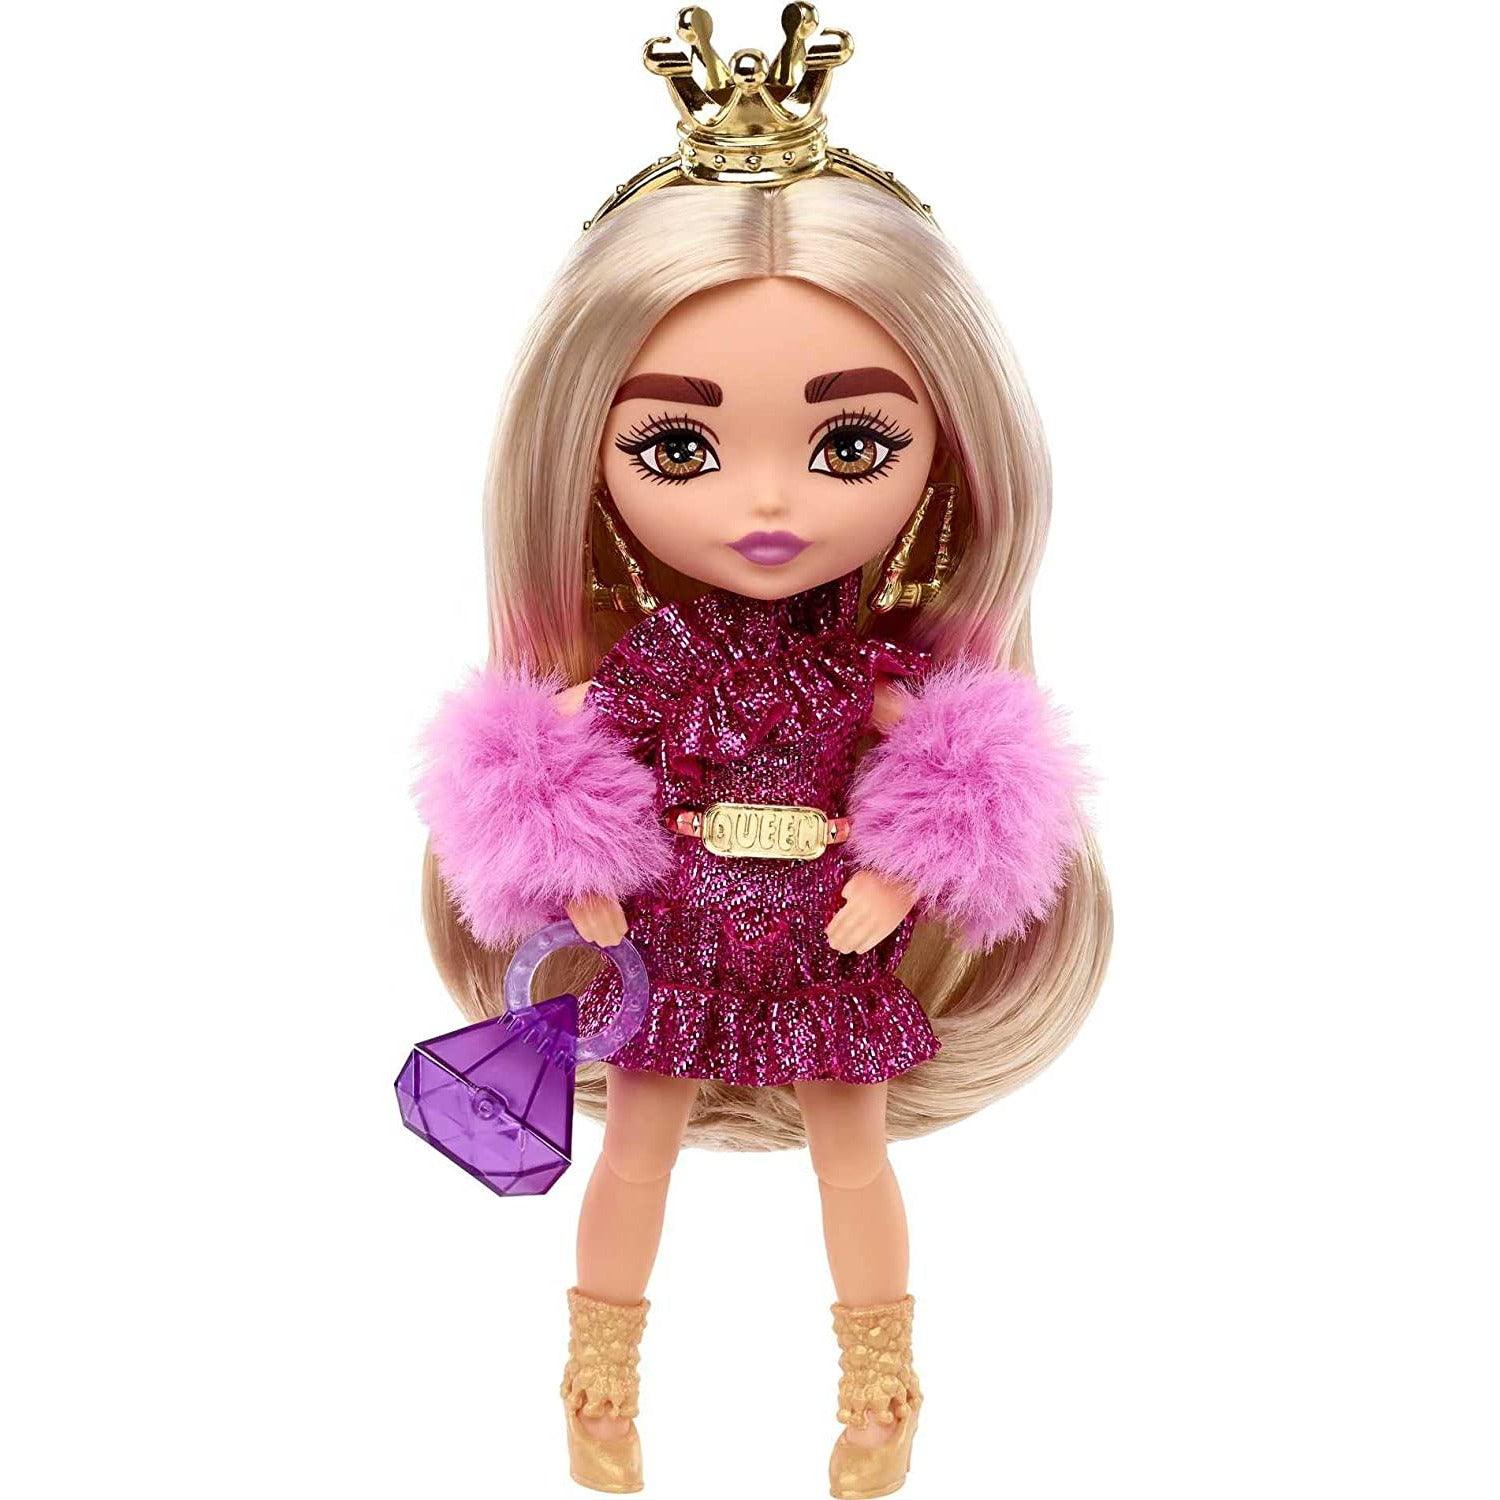 Barbie Extra Minis Doll #8 (5.5 in) Wearing Shimmery Dress & Furry Shrug, with Stand & Accessories - BumbleToys - 5-7 Years, Barbie, Barbie Extra, Dolls, Fashion Dolls & Accessories, Girls, Miniature Dolls & Accessories, OXE, Pre-Order